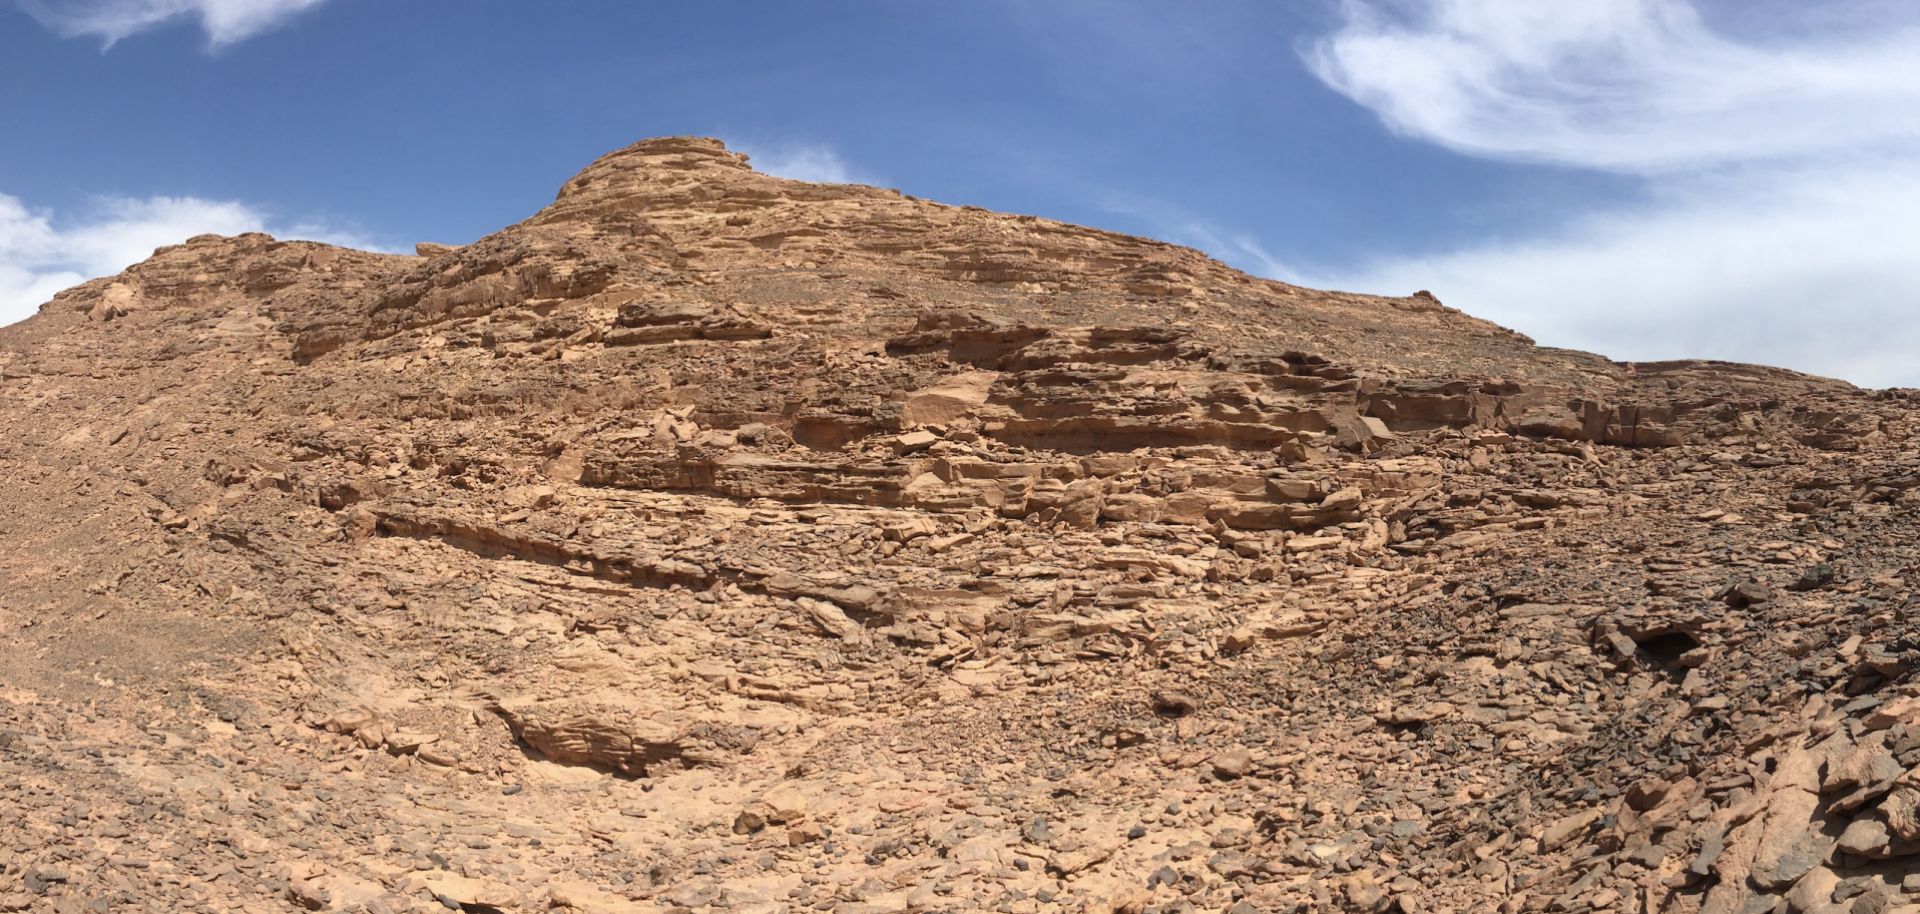 A view from the Sinai Trail, Egypt's first long-distance hiking trail.